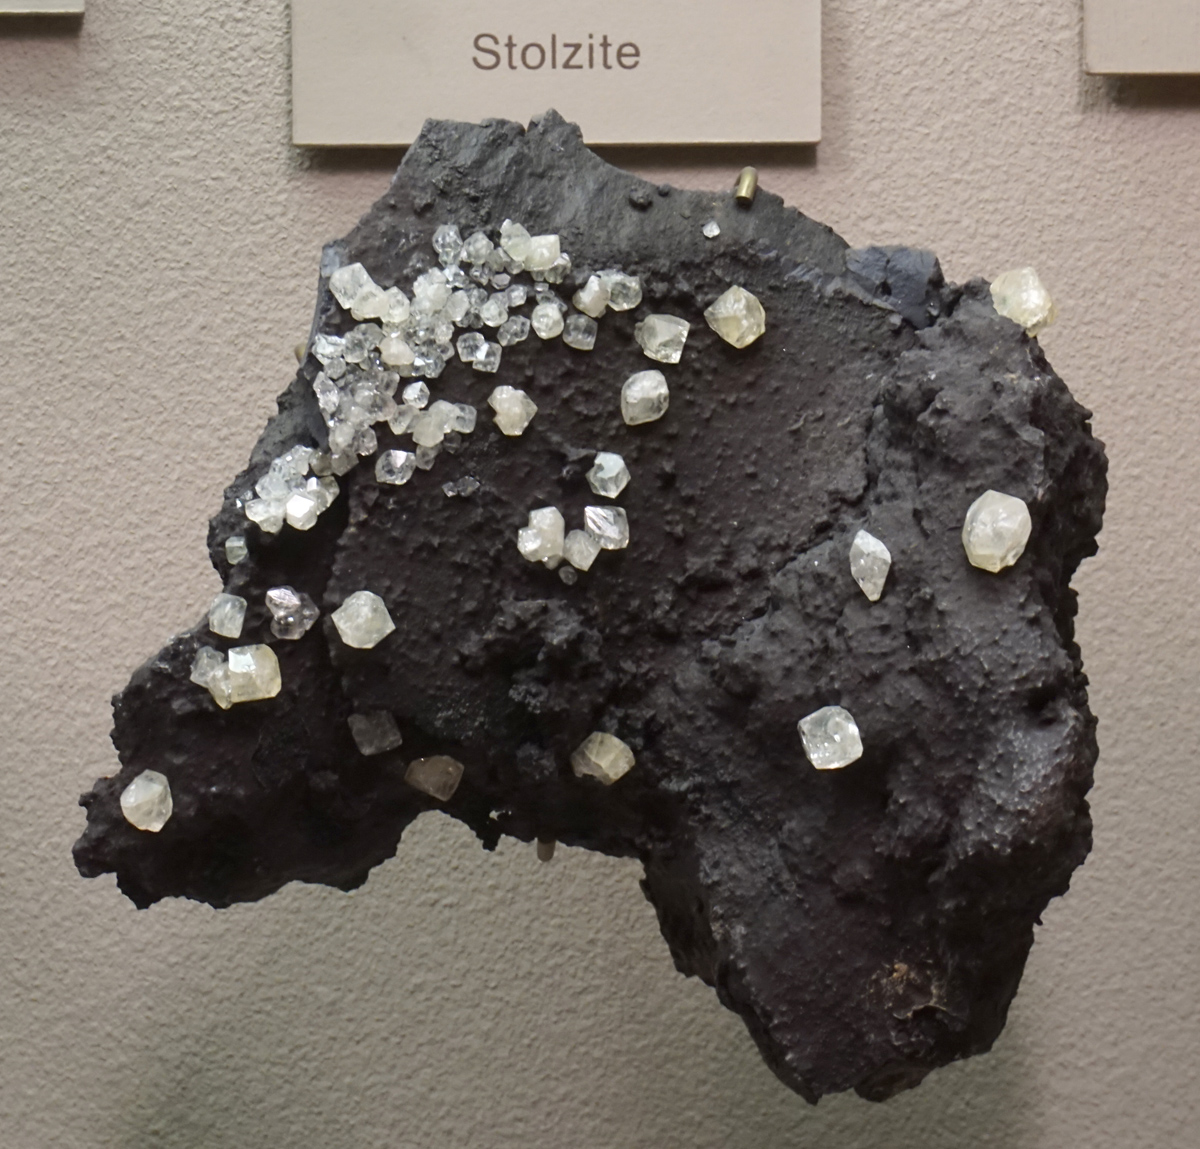 Lustrous White Stolzite Crystals